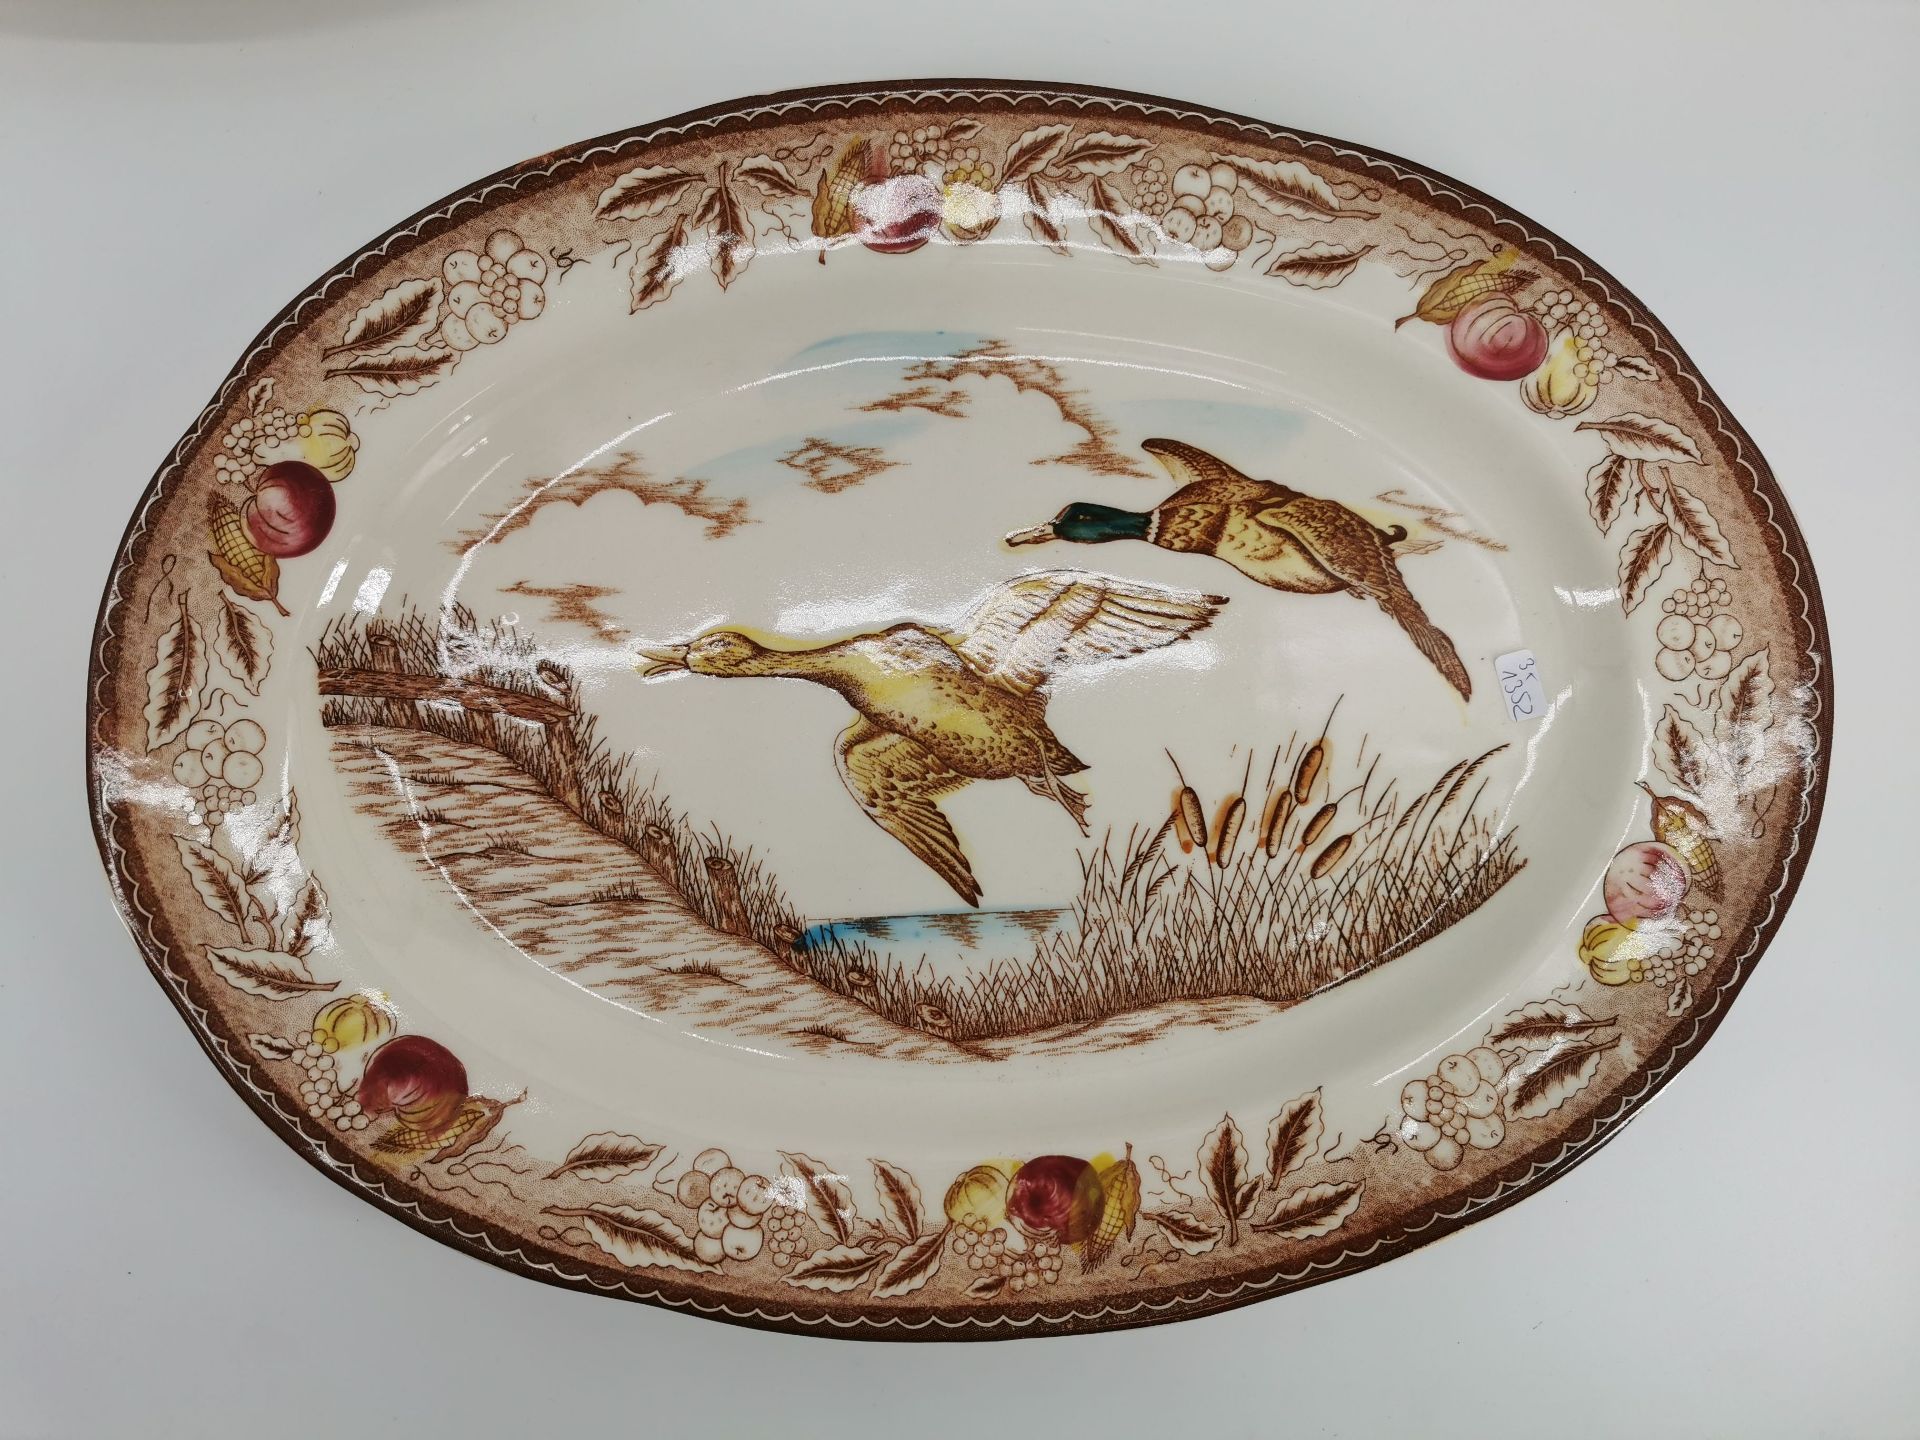 3 HUNTING SERVING PLATES - Image 3 of 3